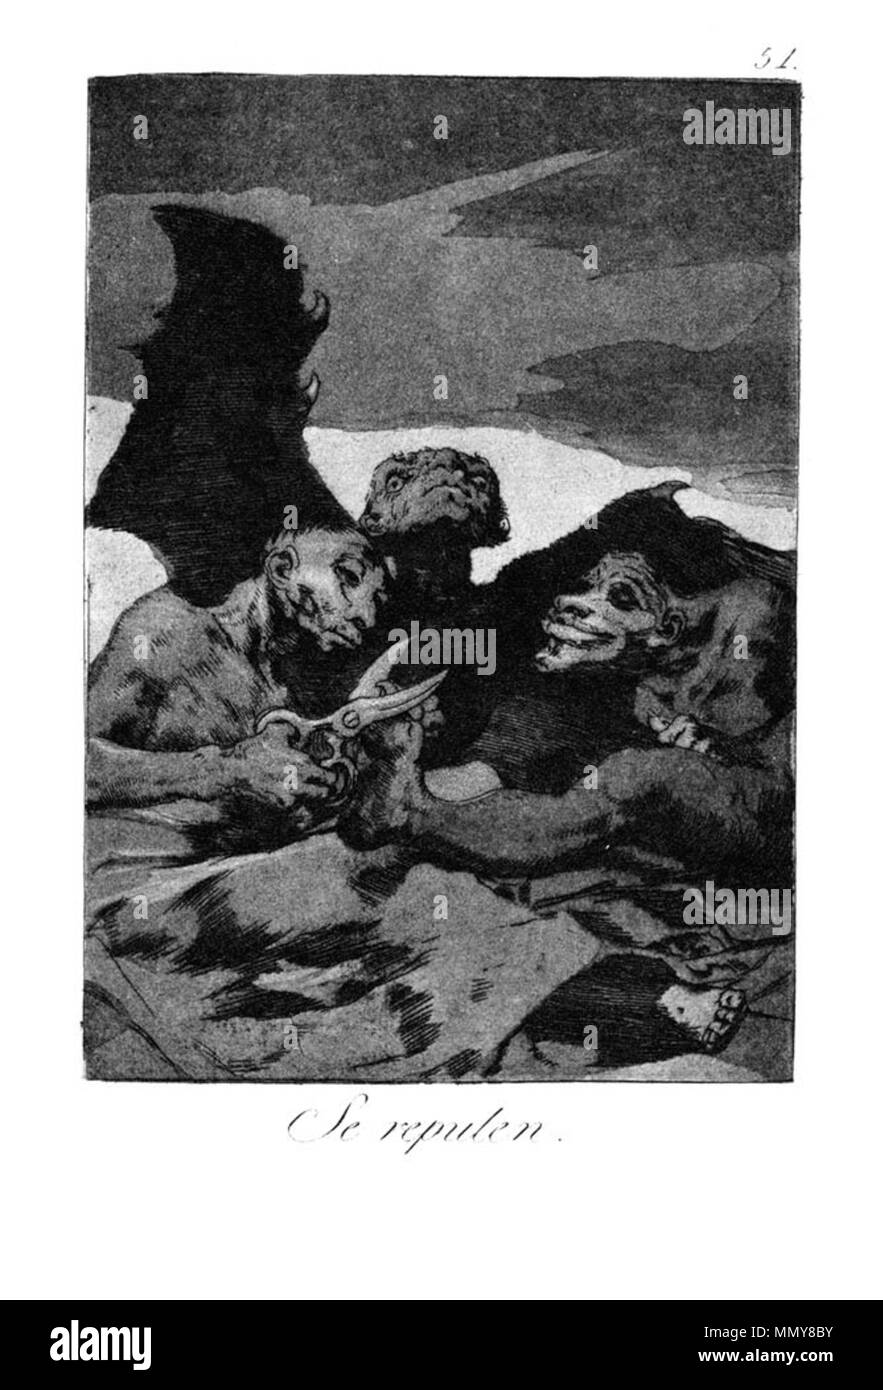 . Los Caprichos is a set of 80 aquatint prints created by Francisco Goya for release in 1799.  . 1799.   Francisco Goya  (1746–1828)      Alternative names Francisco Goya Lucientes, Francisco de Goya y Lucientes, Francisco José Goya Lucientes  Description Spanish painter, printmaker, lithographer, engraver and etcher  Date of birth/death 30 March 1746 16 April 1828  Location of birth/death Fuendetodos Bordeaux  Work location Madrid, Zaragoza, Bordeaux  Authority control  : Q5432 VIAF:?54343141 ISNI:?0000 0001 2280 1608 ULAN:?500118936 LCCN:?n79003363 NLA:?36545788 WorldCat Goya - Caprichos (51 Stock Photo